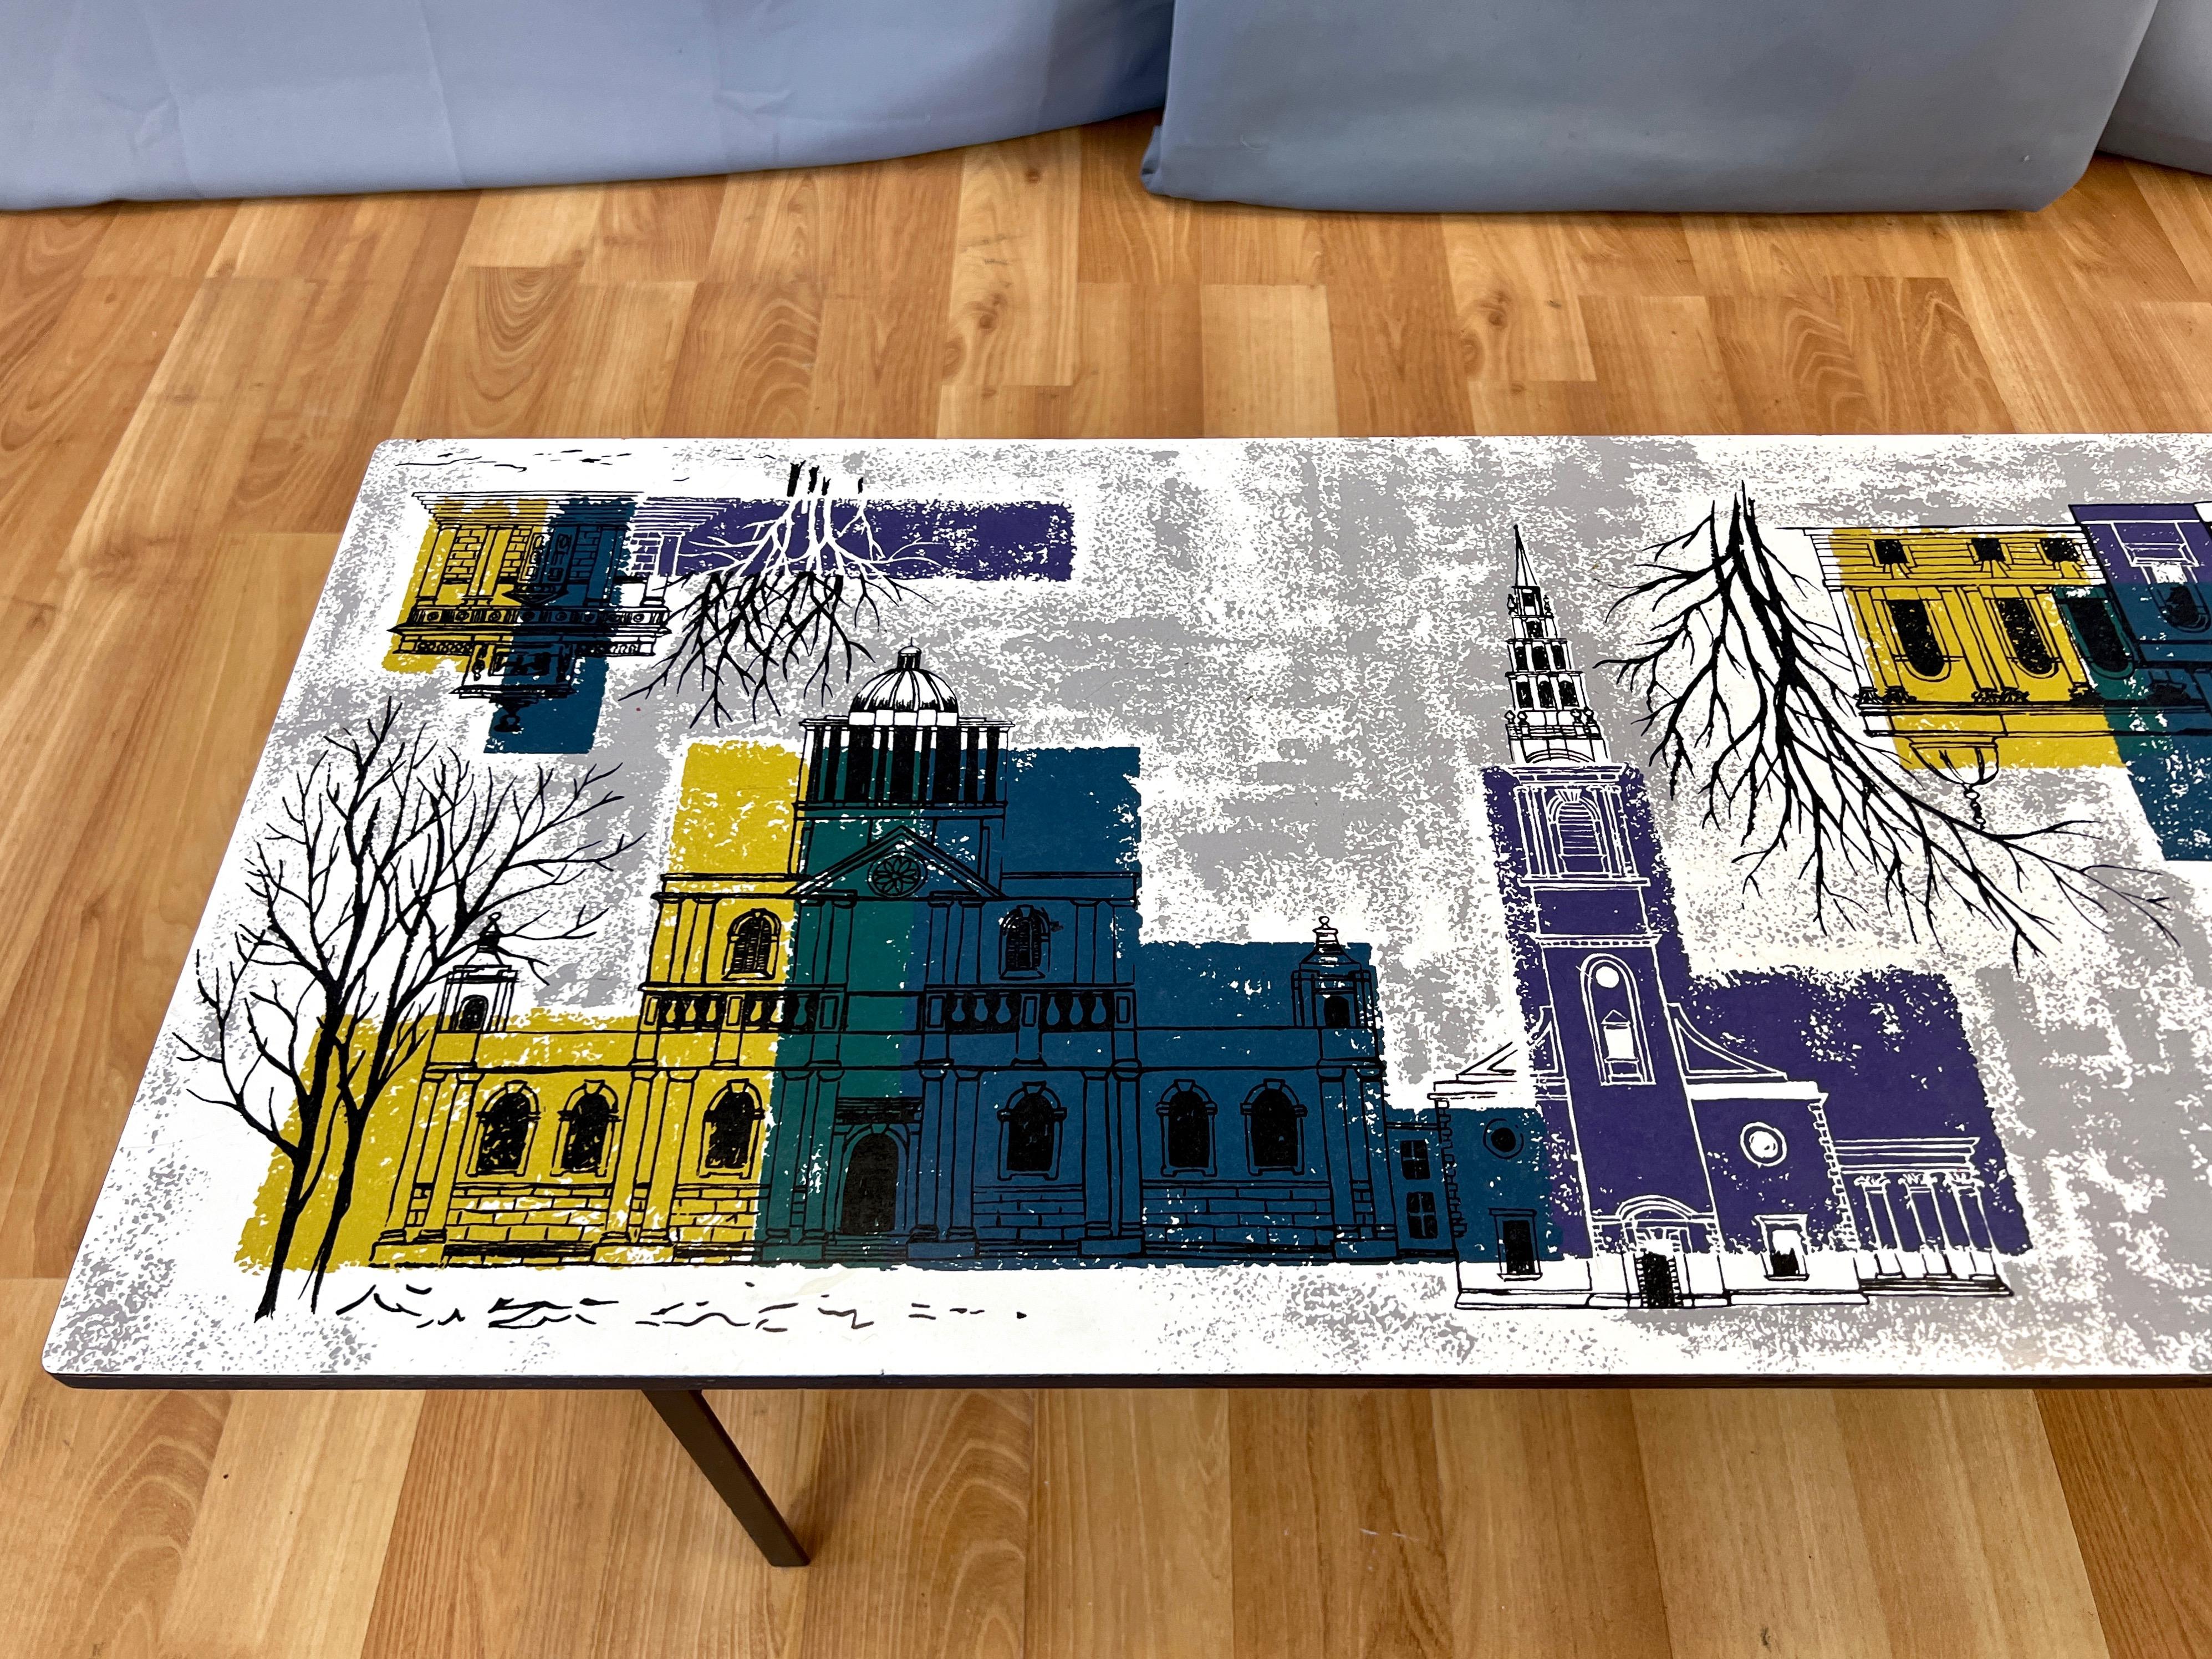 Metal John Piper London Skyline Coffee Table by Myer for Conran and Heal’s, c. 1960 For Sale